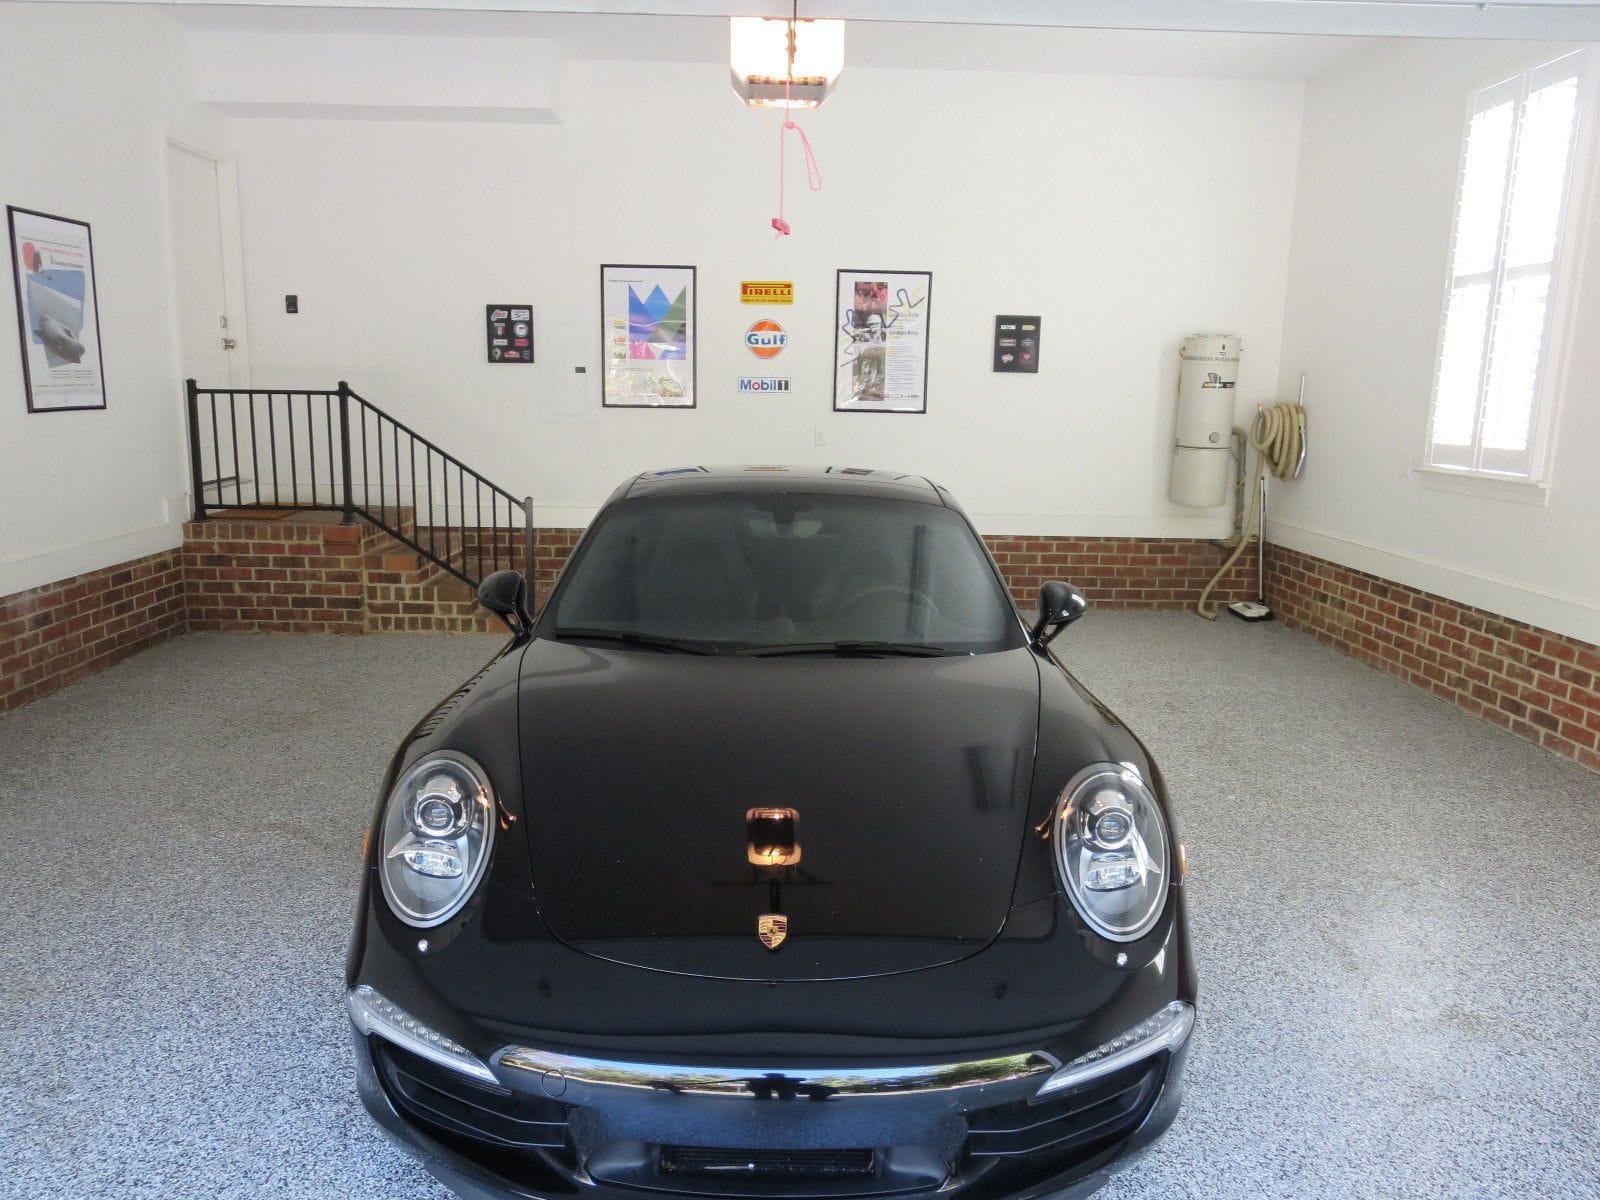 2015 Porsche 911 - 2015 Porsche 911 C4S with Powerkit - Used - VIN WP0AB2A98FS110184 - 66,000 Miles - 6 cyl - 4WD - Automatic - Coupe - Black - Charlotte, NC 28277, United States